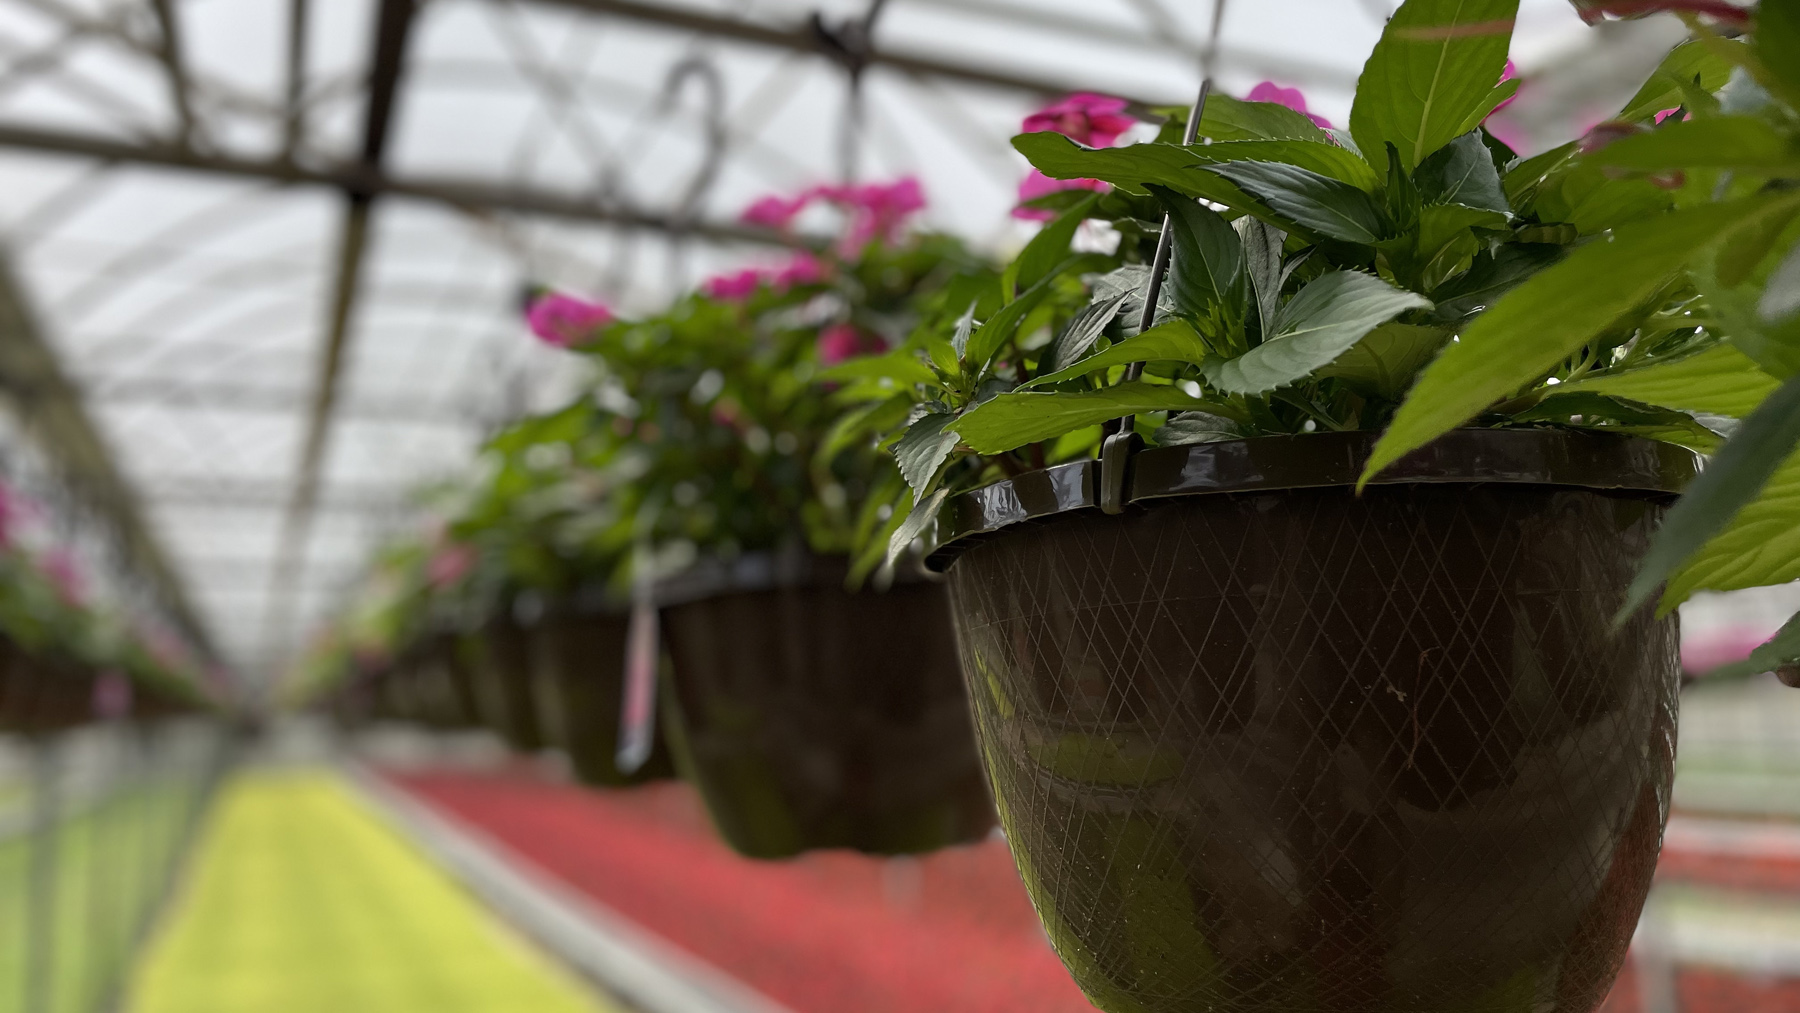 A row of flower pots hanging from the ceiling of a commercial greenhouse operated by Rockwell Farms, with hundreds of colorful flowers arranged in columns on the ground, all waiting to be transported and sold at local retailers across North Carolina.